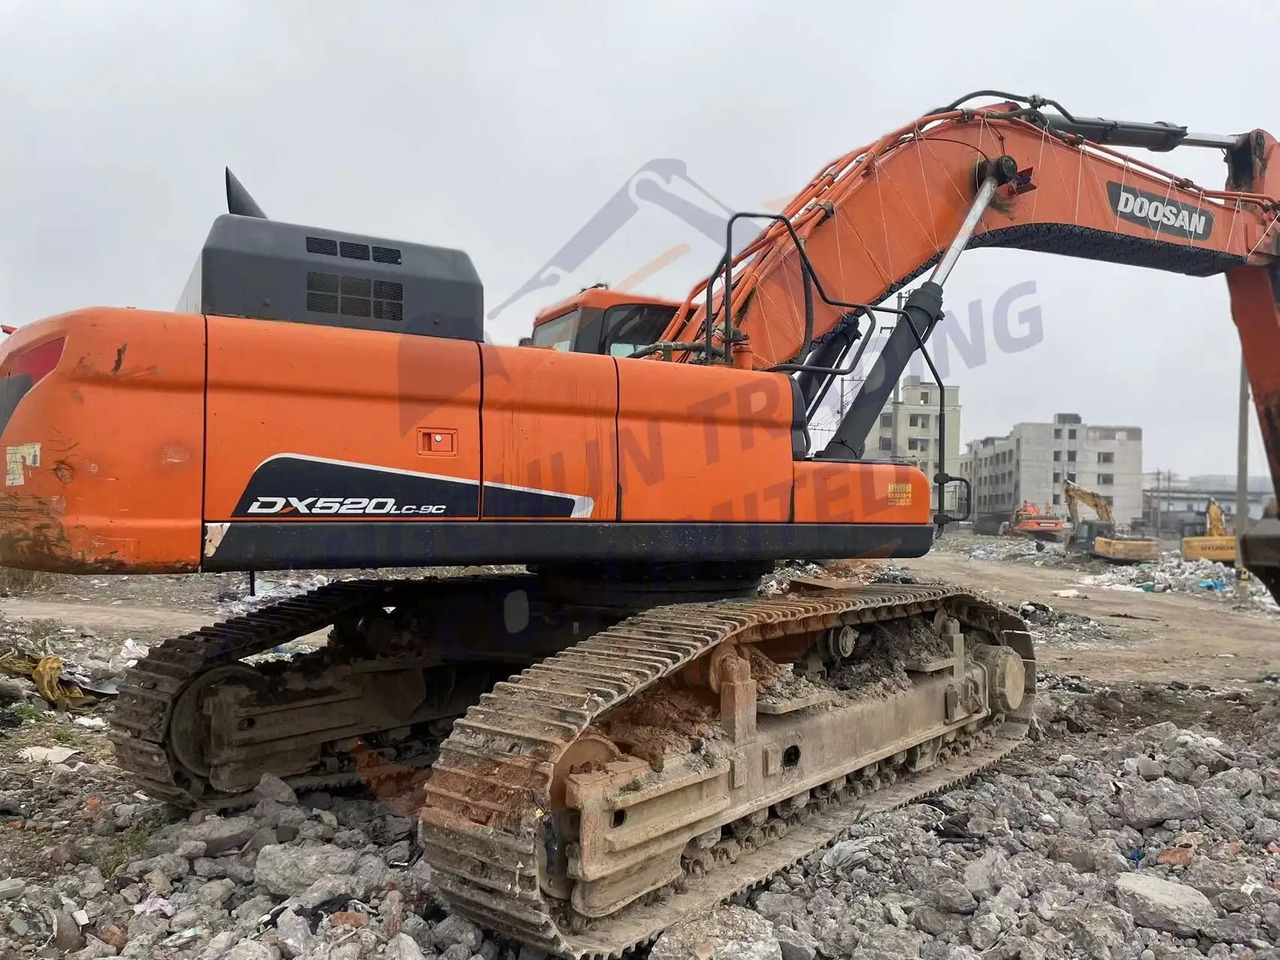 Máy xúc bánh xích new arrival Used Doosan excavator DX520LC-9C in good condition for sale in good condition: hình 5